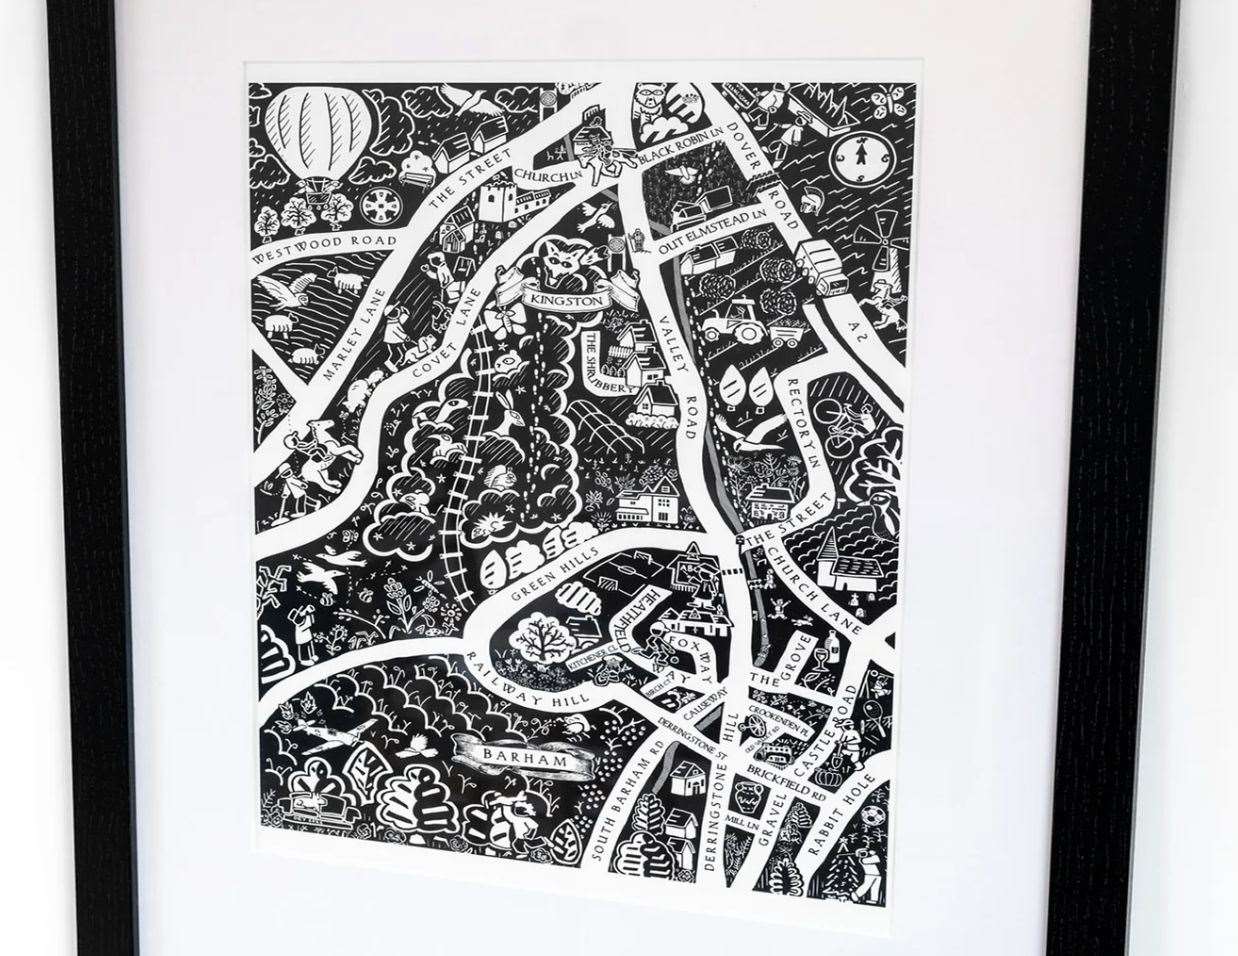 After he finishes the designs, Daniel's maps are printed as giclée and aluminium prints and made into tea towels